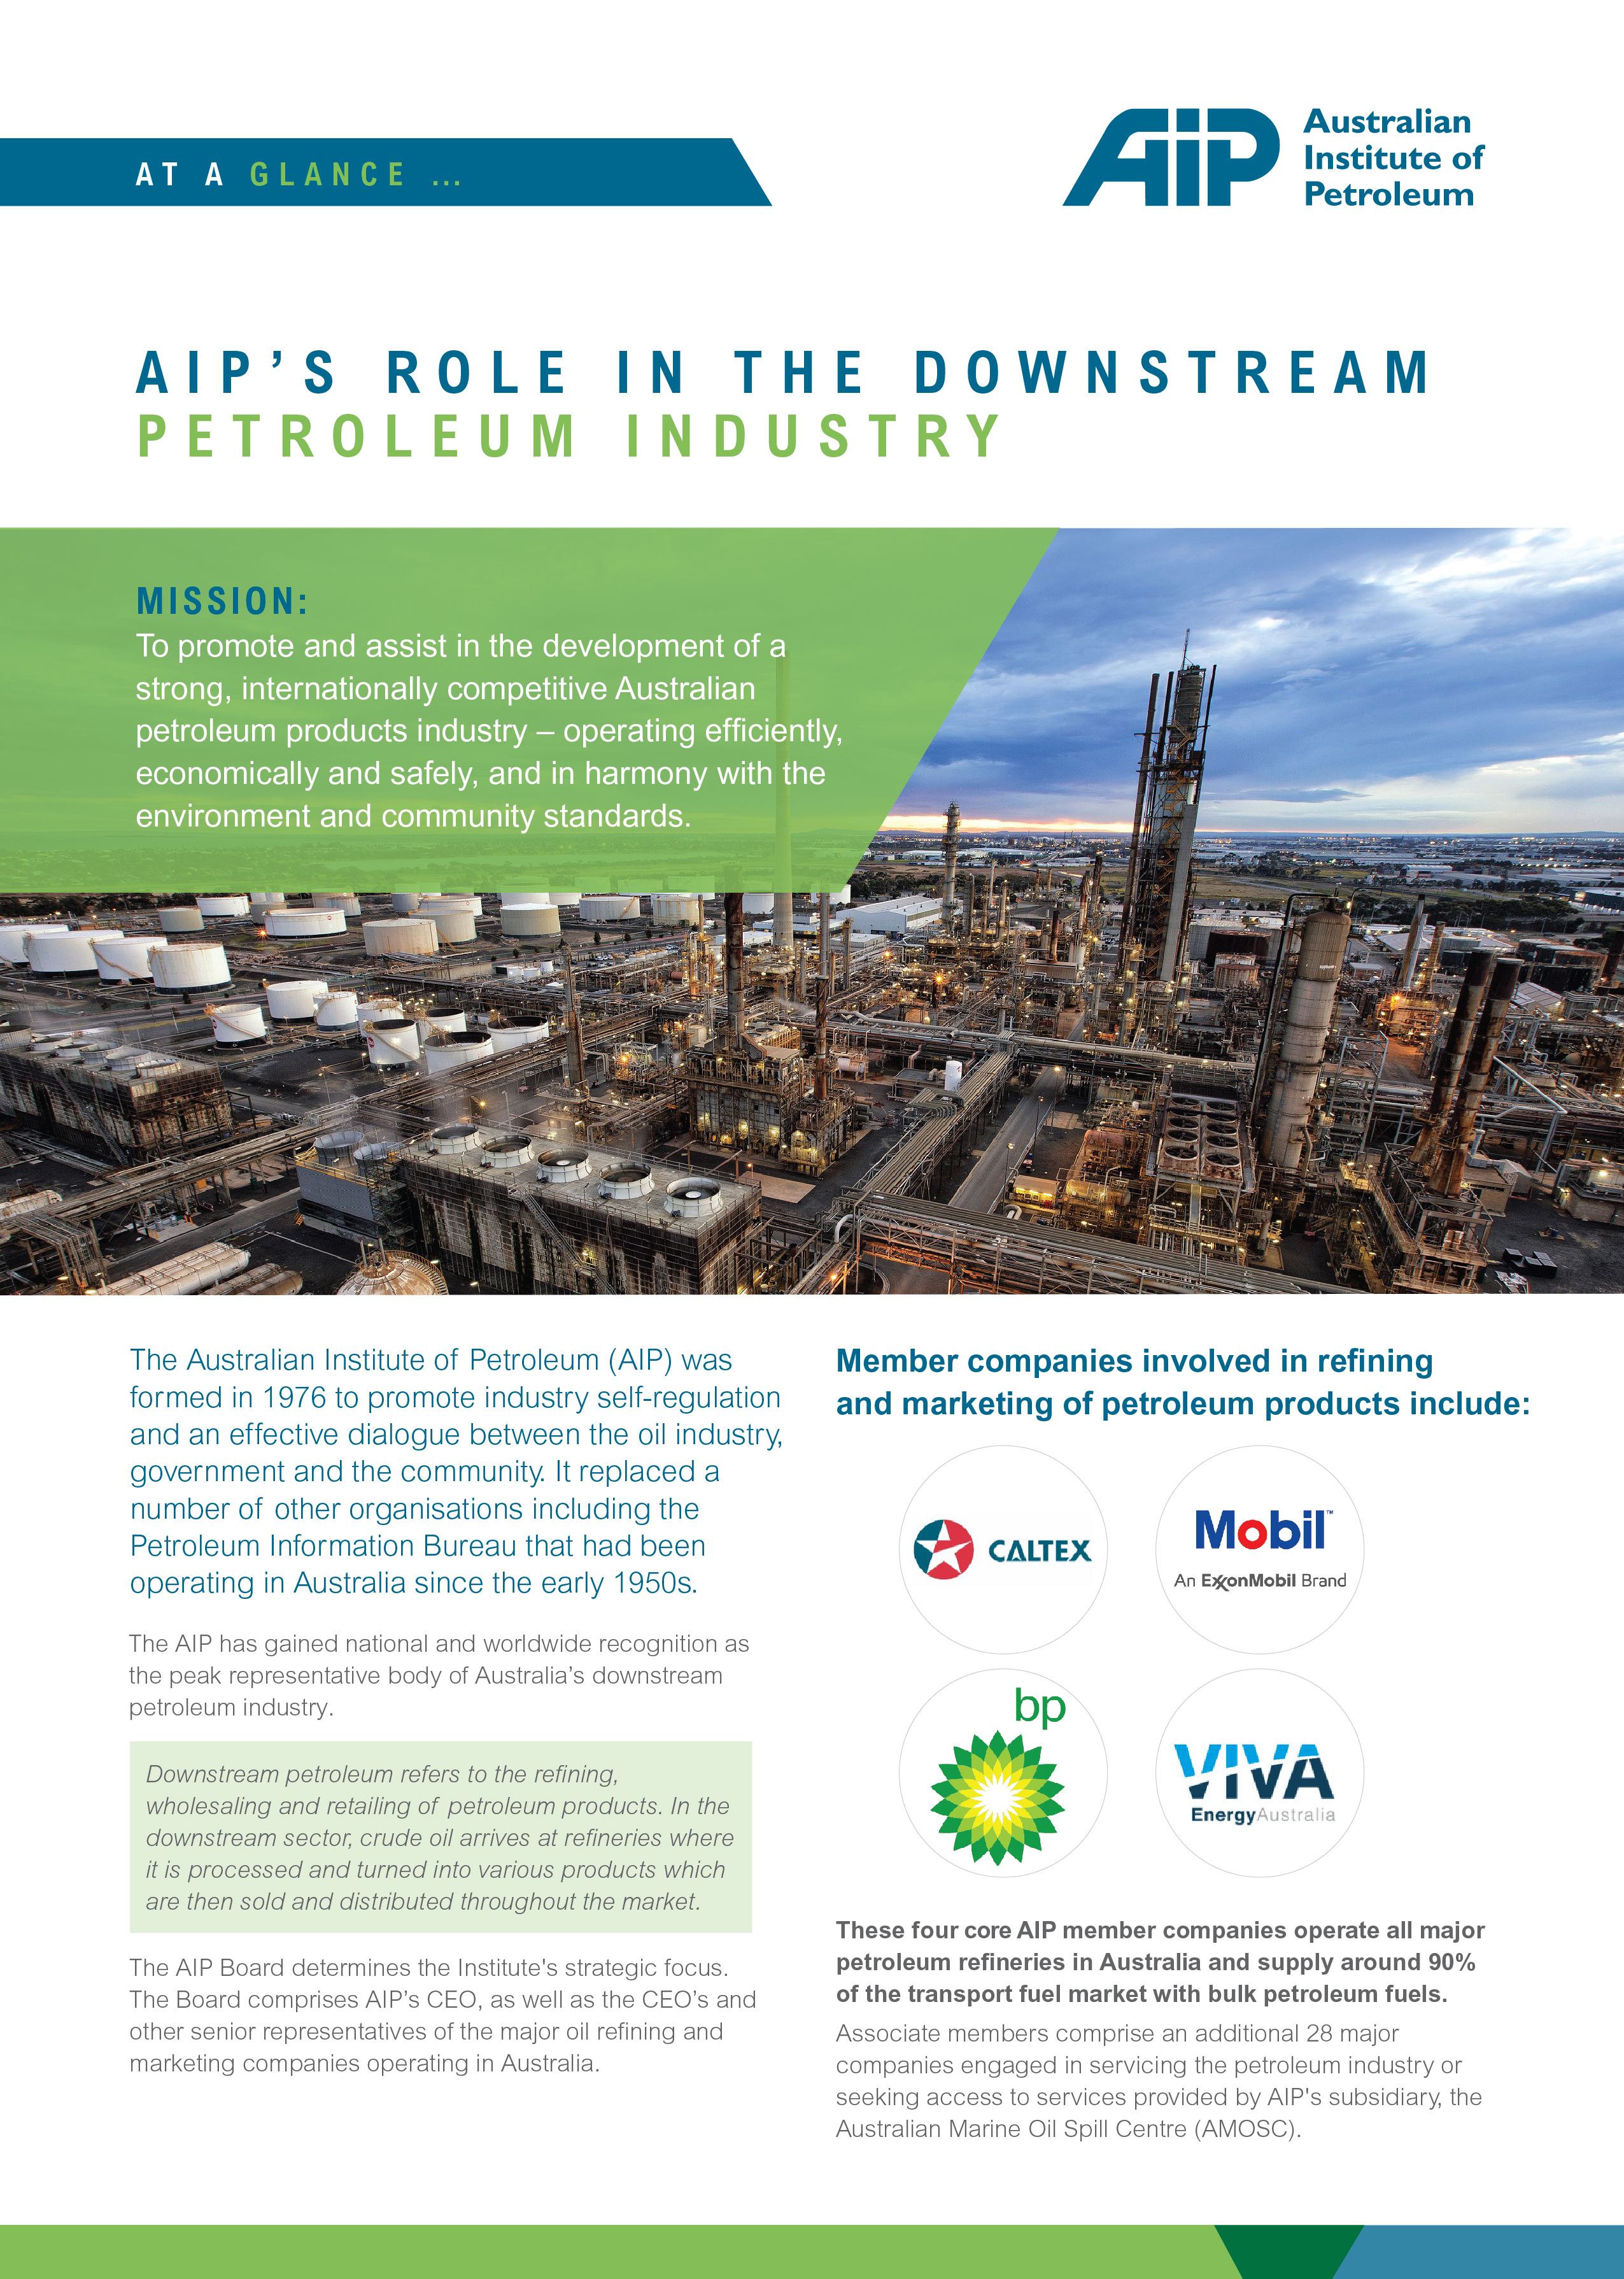 At a Glance: AIP's Role in the Downstream Petroleum Industry